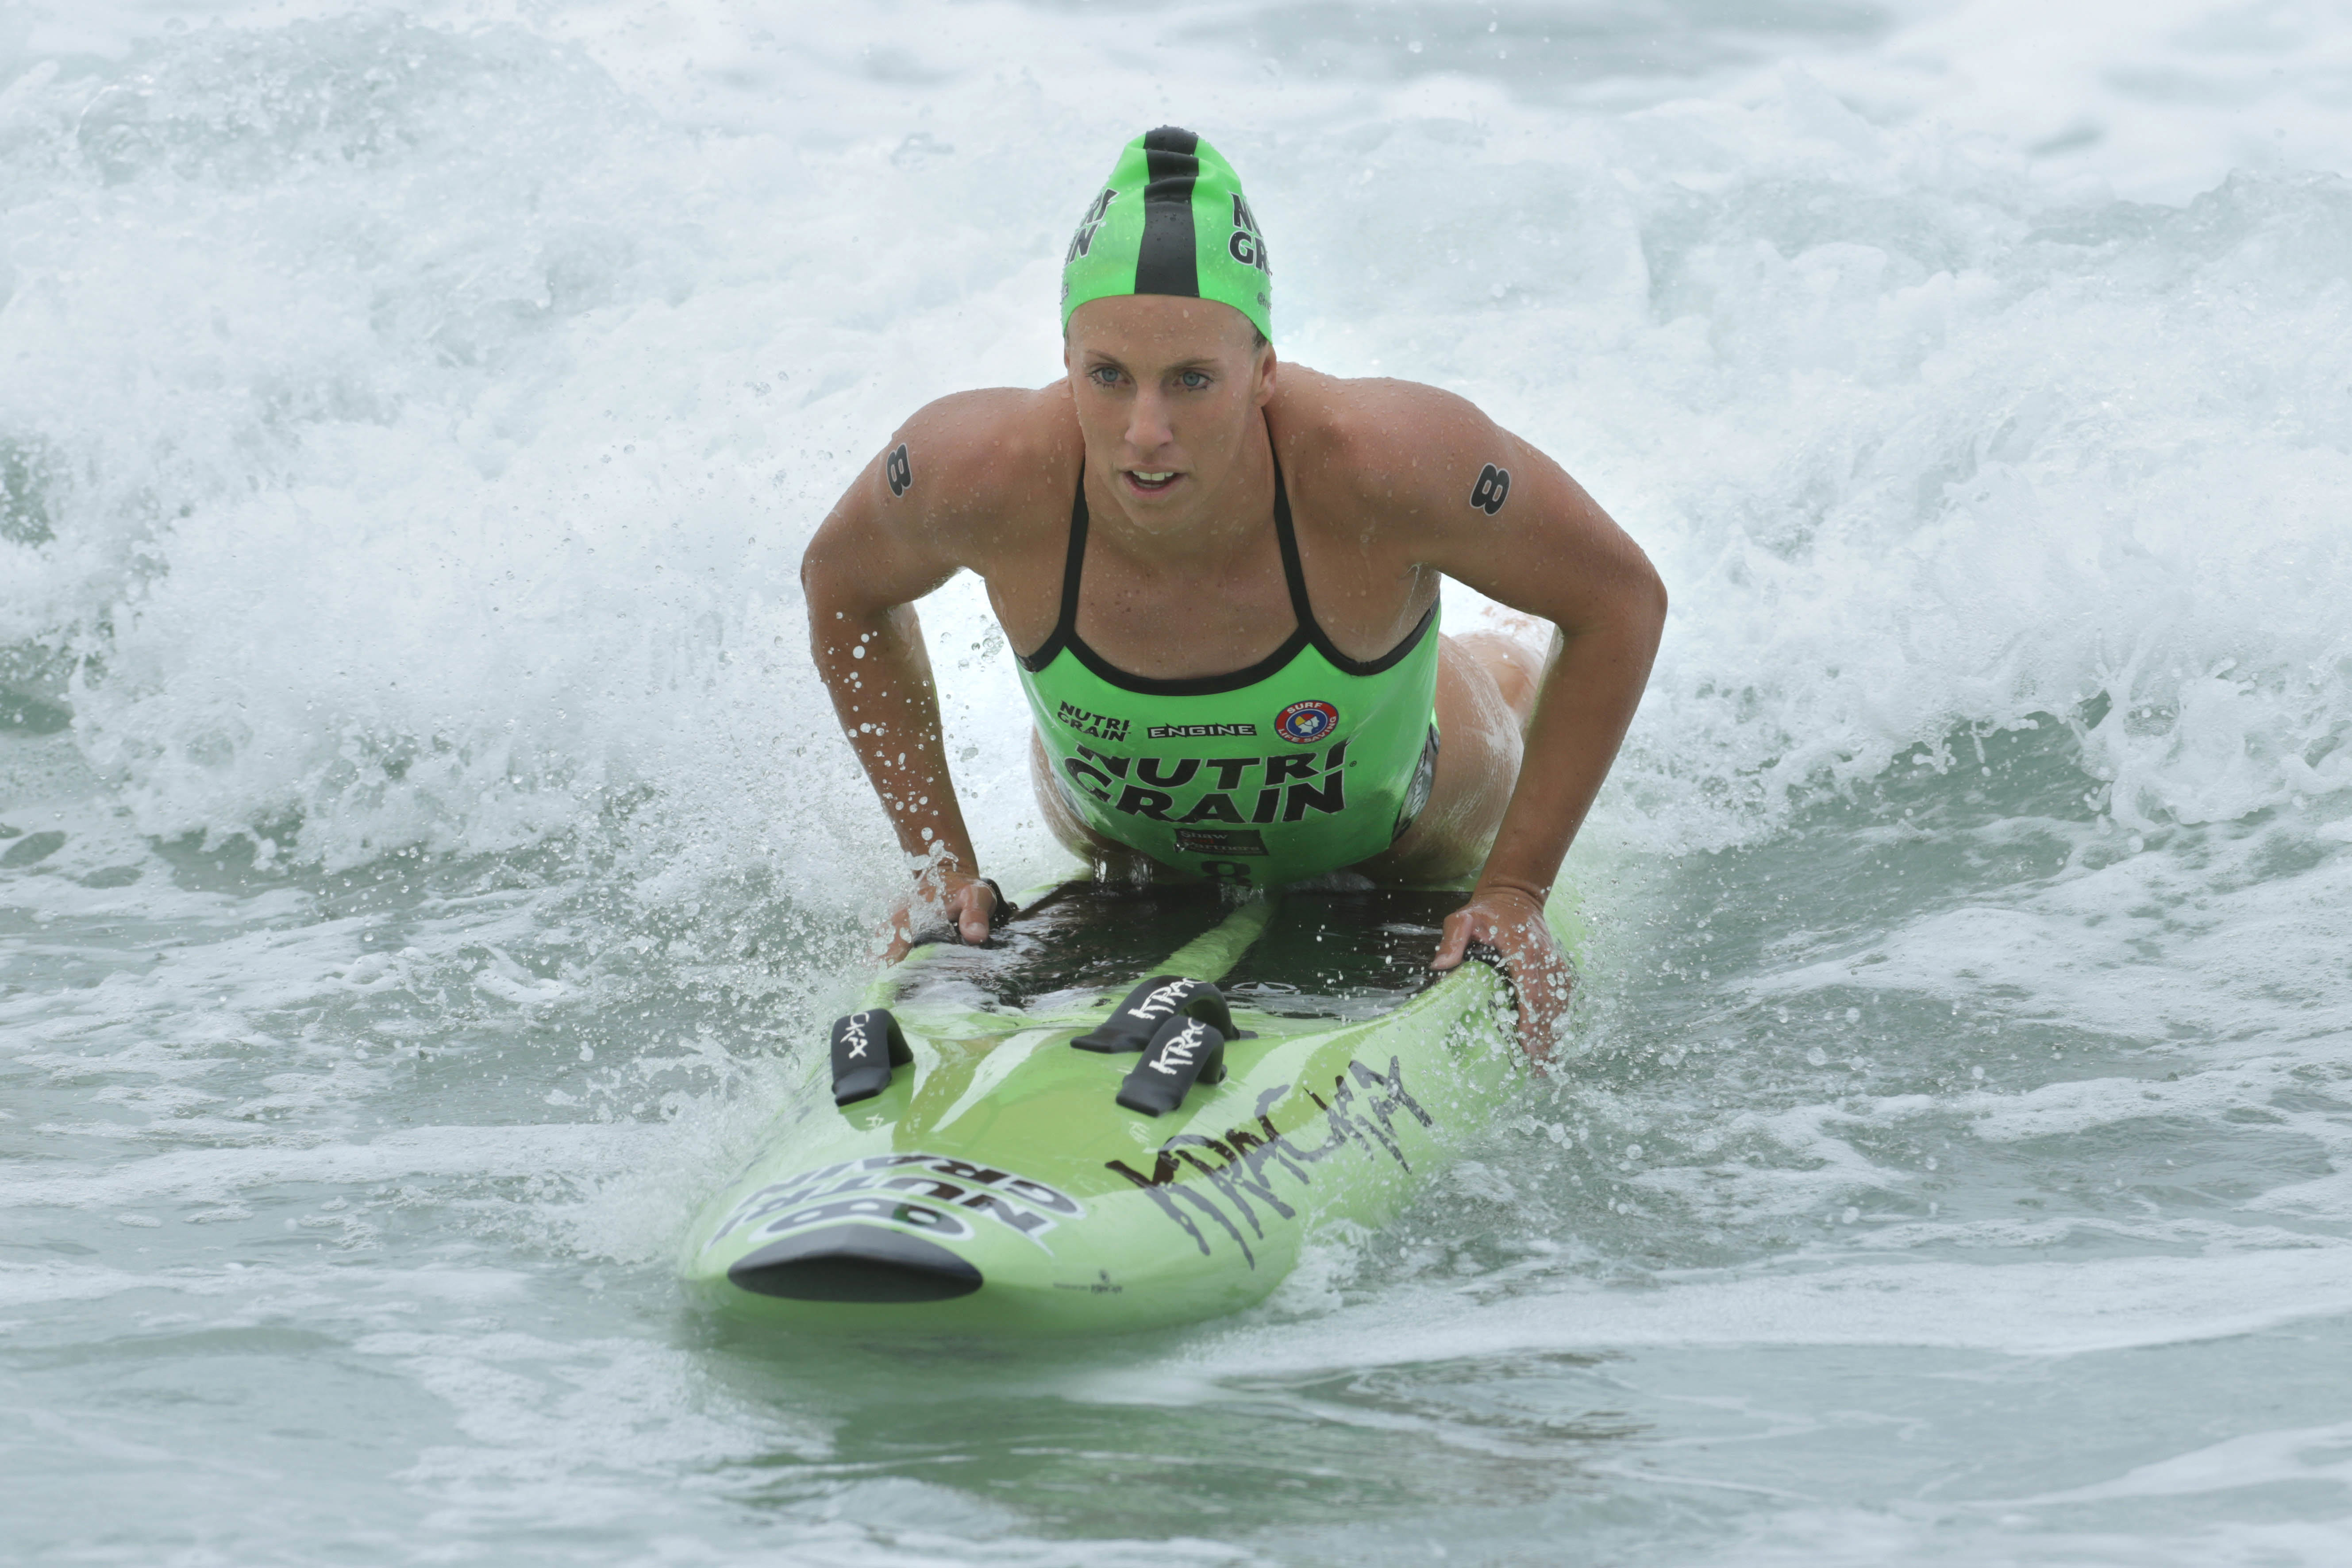 IronWoman sensation determined to finish top